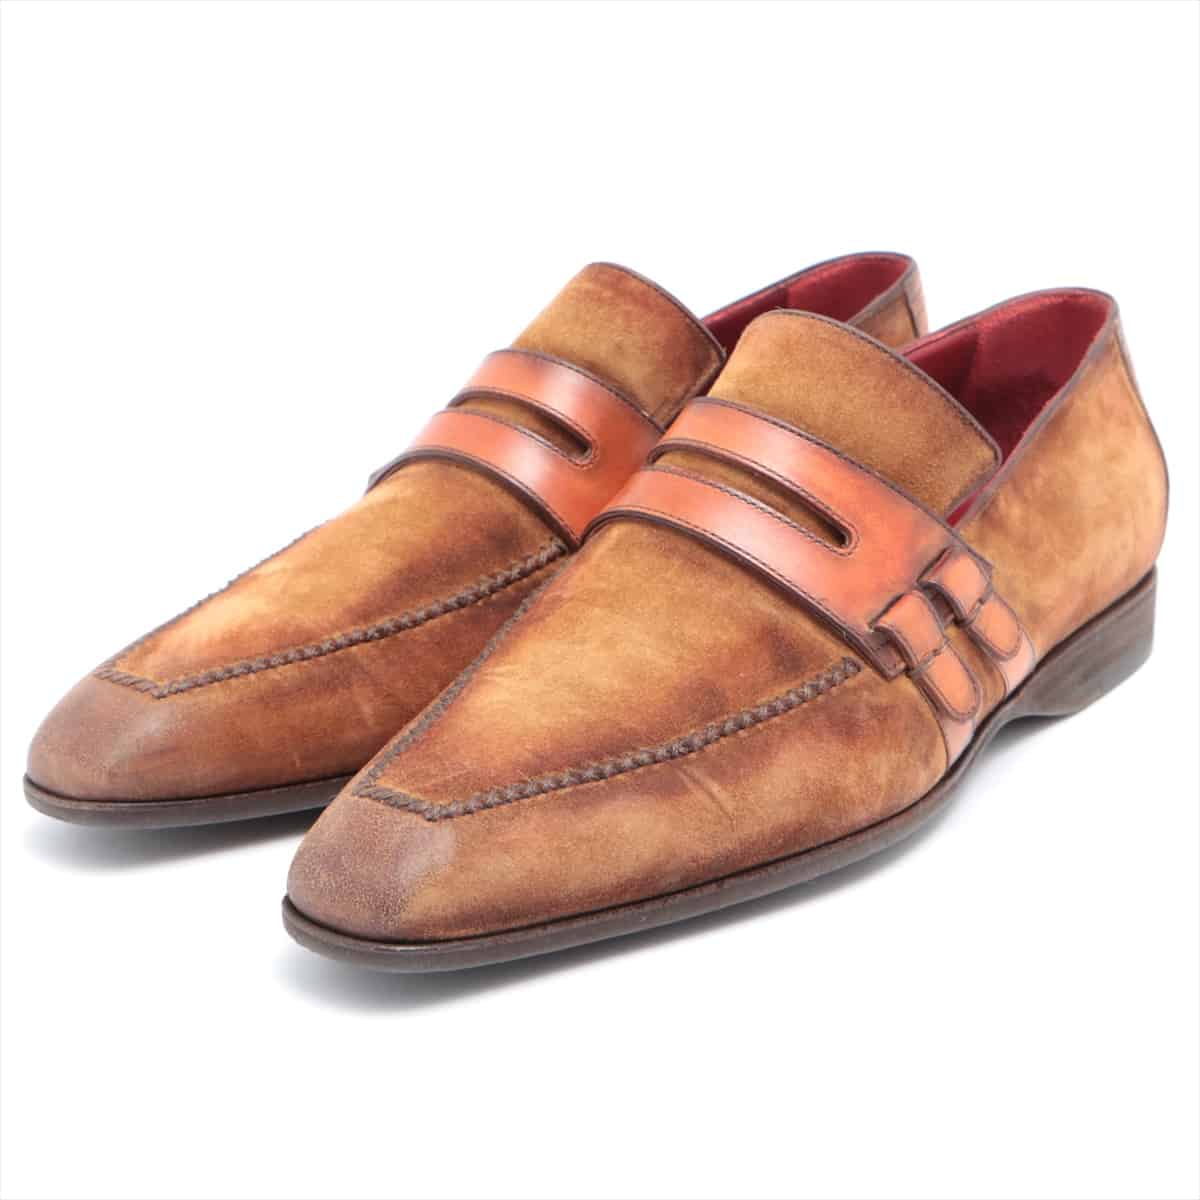 Berluti Suede & Leather Loafer 8 Men's Brown art collection